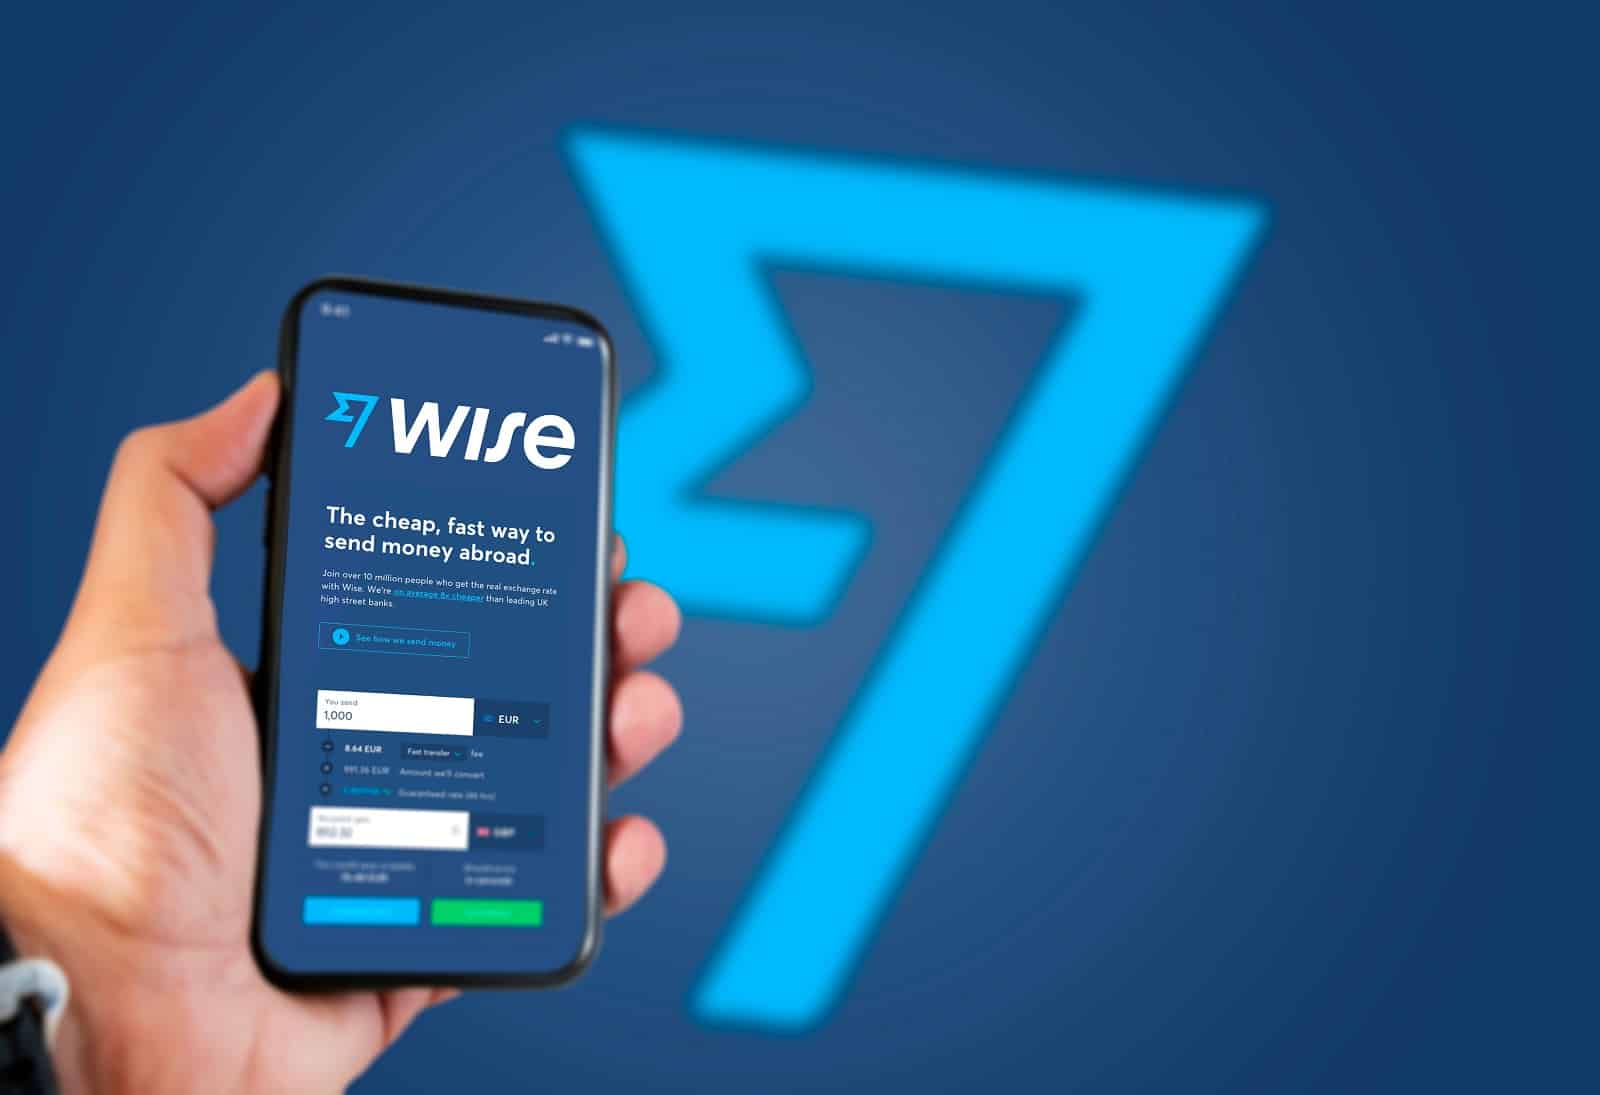 <p><span>Wise is renowned for its transparent fee structure and real exchange rates. It allows you to hold and convert money in multiple currencies, which is invaluable when hopping between countries. The app’s intuitive design makes managing your finances straightforward, even when you’re on the move.</span></p> <p><b>Insider’s Tip: </b><span>Use Wise to convert large sums of money before traveling – their rates are usually more favorable than what you’ll find overseas.</span></p>